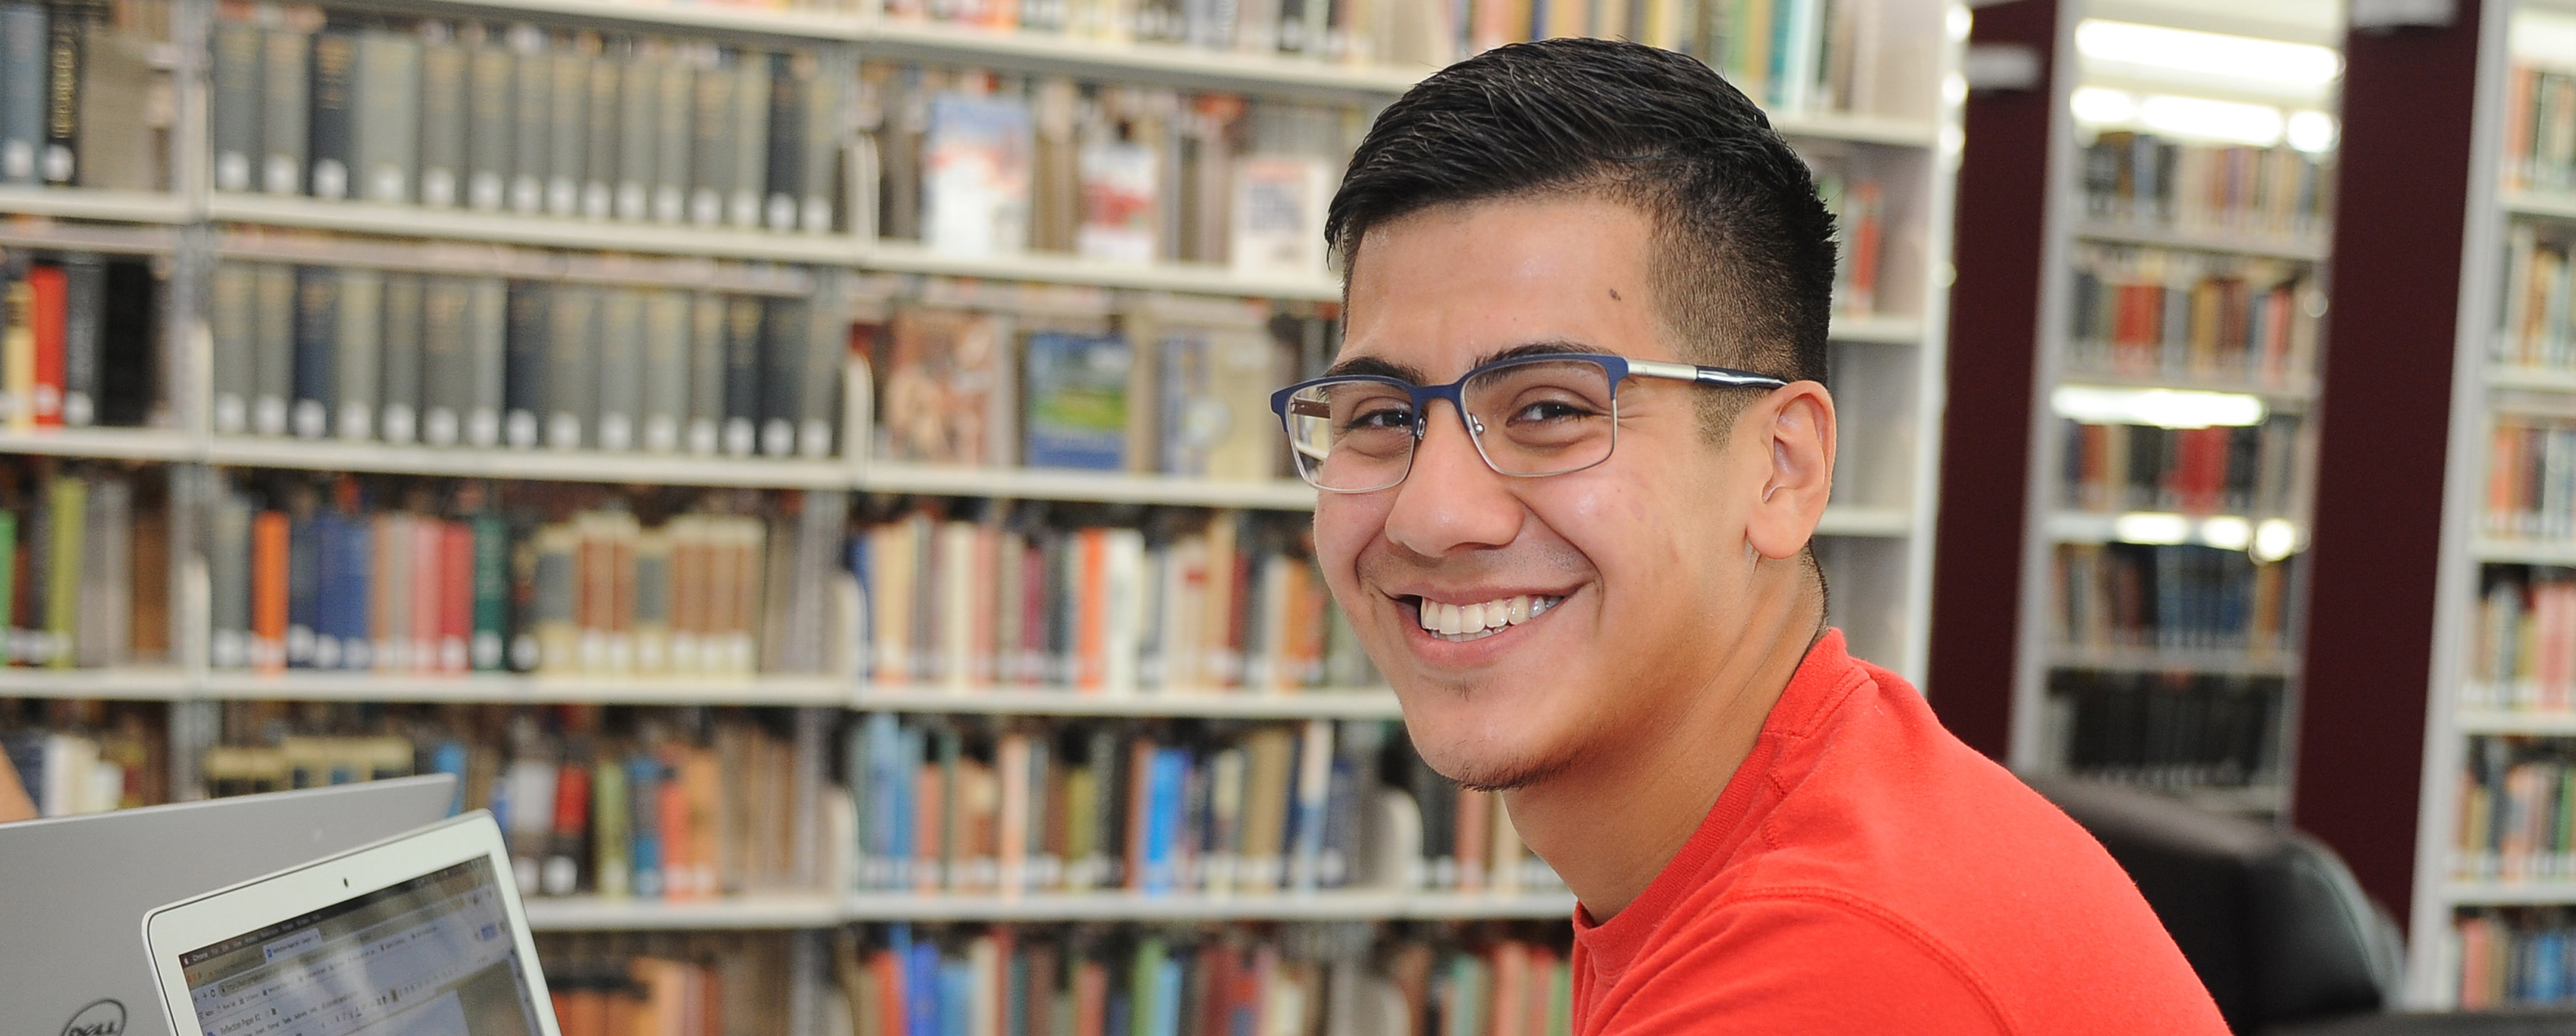 Male student in library with shelves of books in the background. He is seated in front of a computer screen but smiling at the camera.